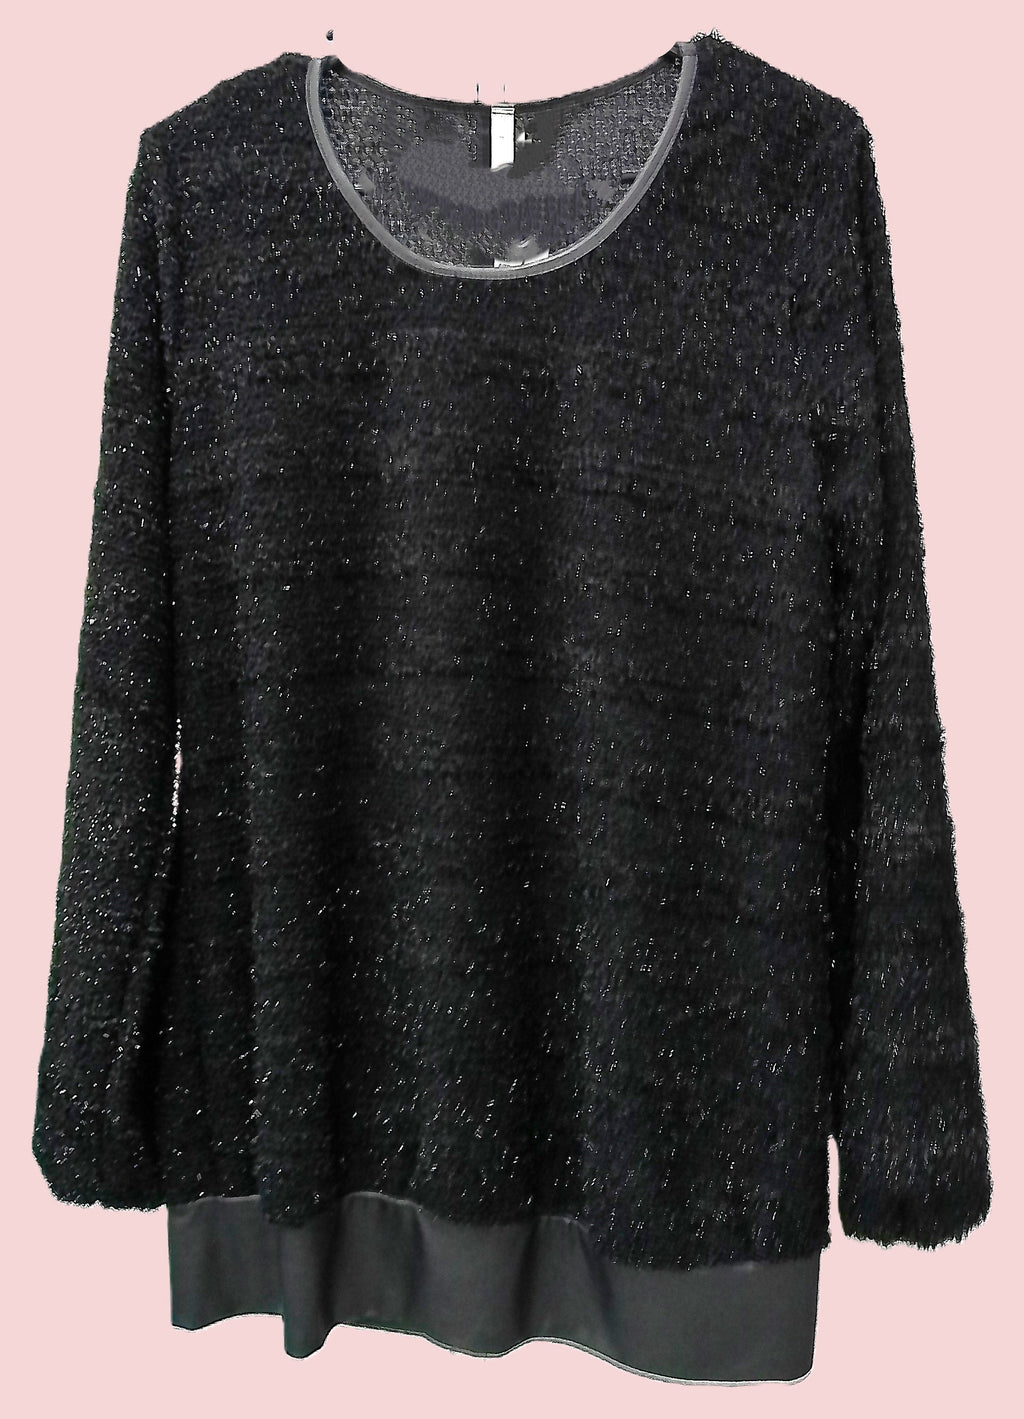 Black Top with sparkles   by  mia soli